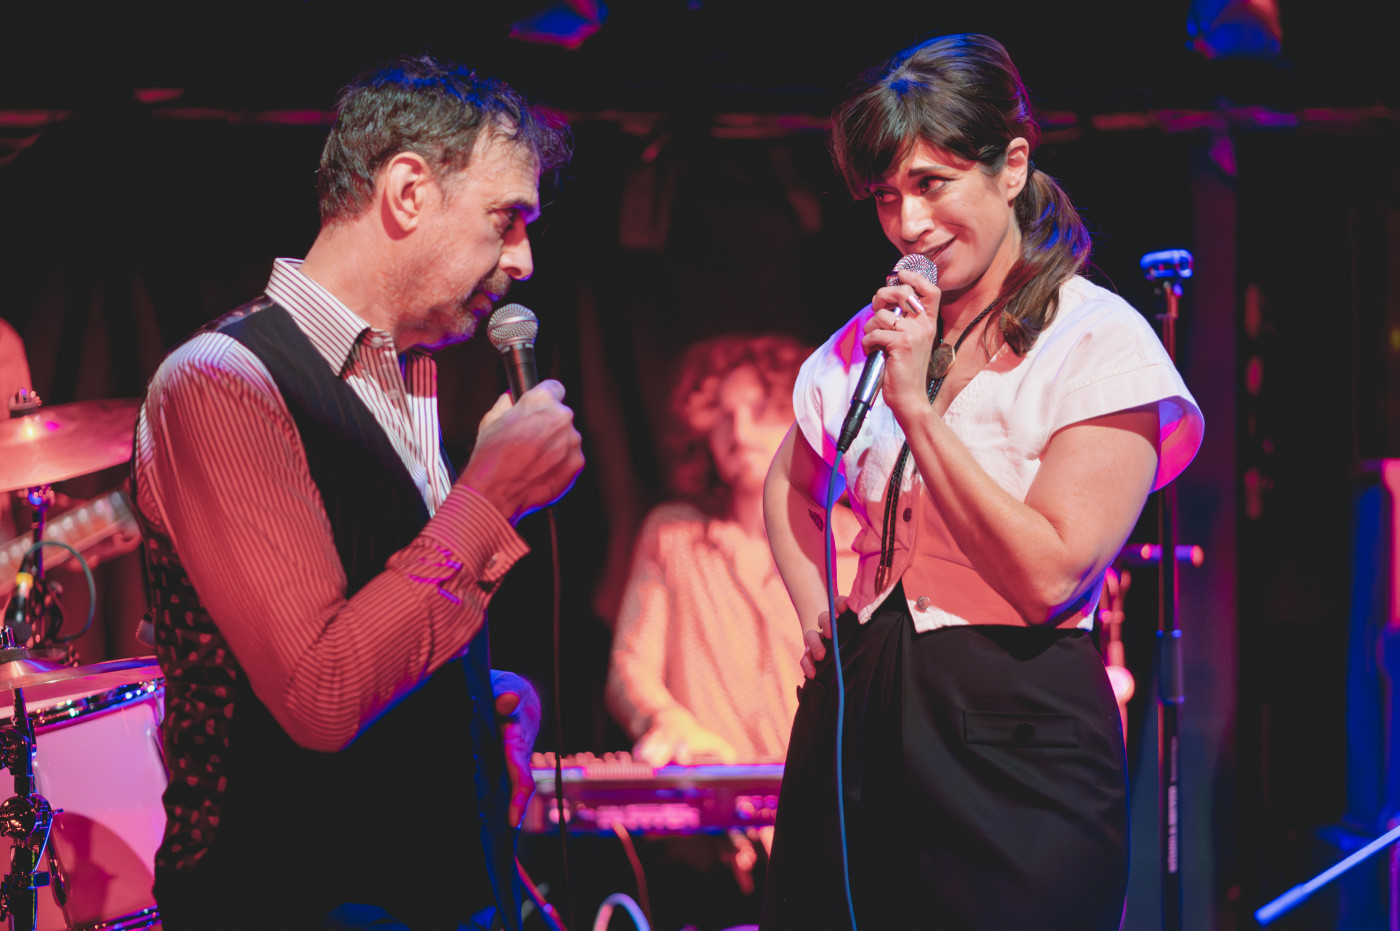 In Pictures: Nicole Atkins & Jim Sclavunos in Newcastle